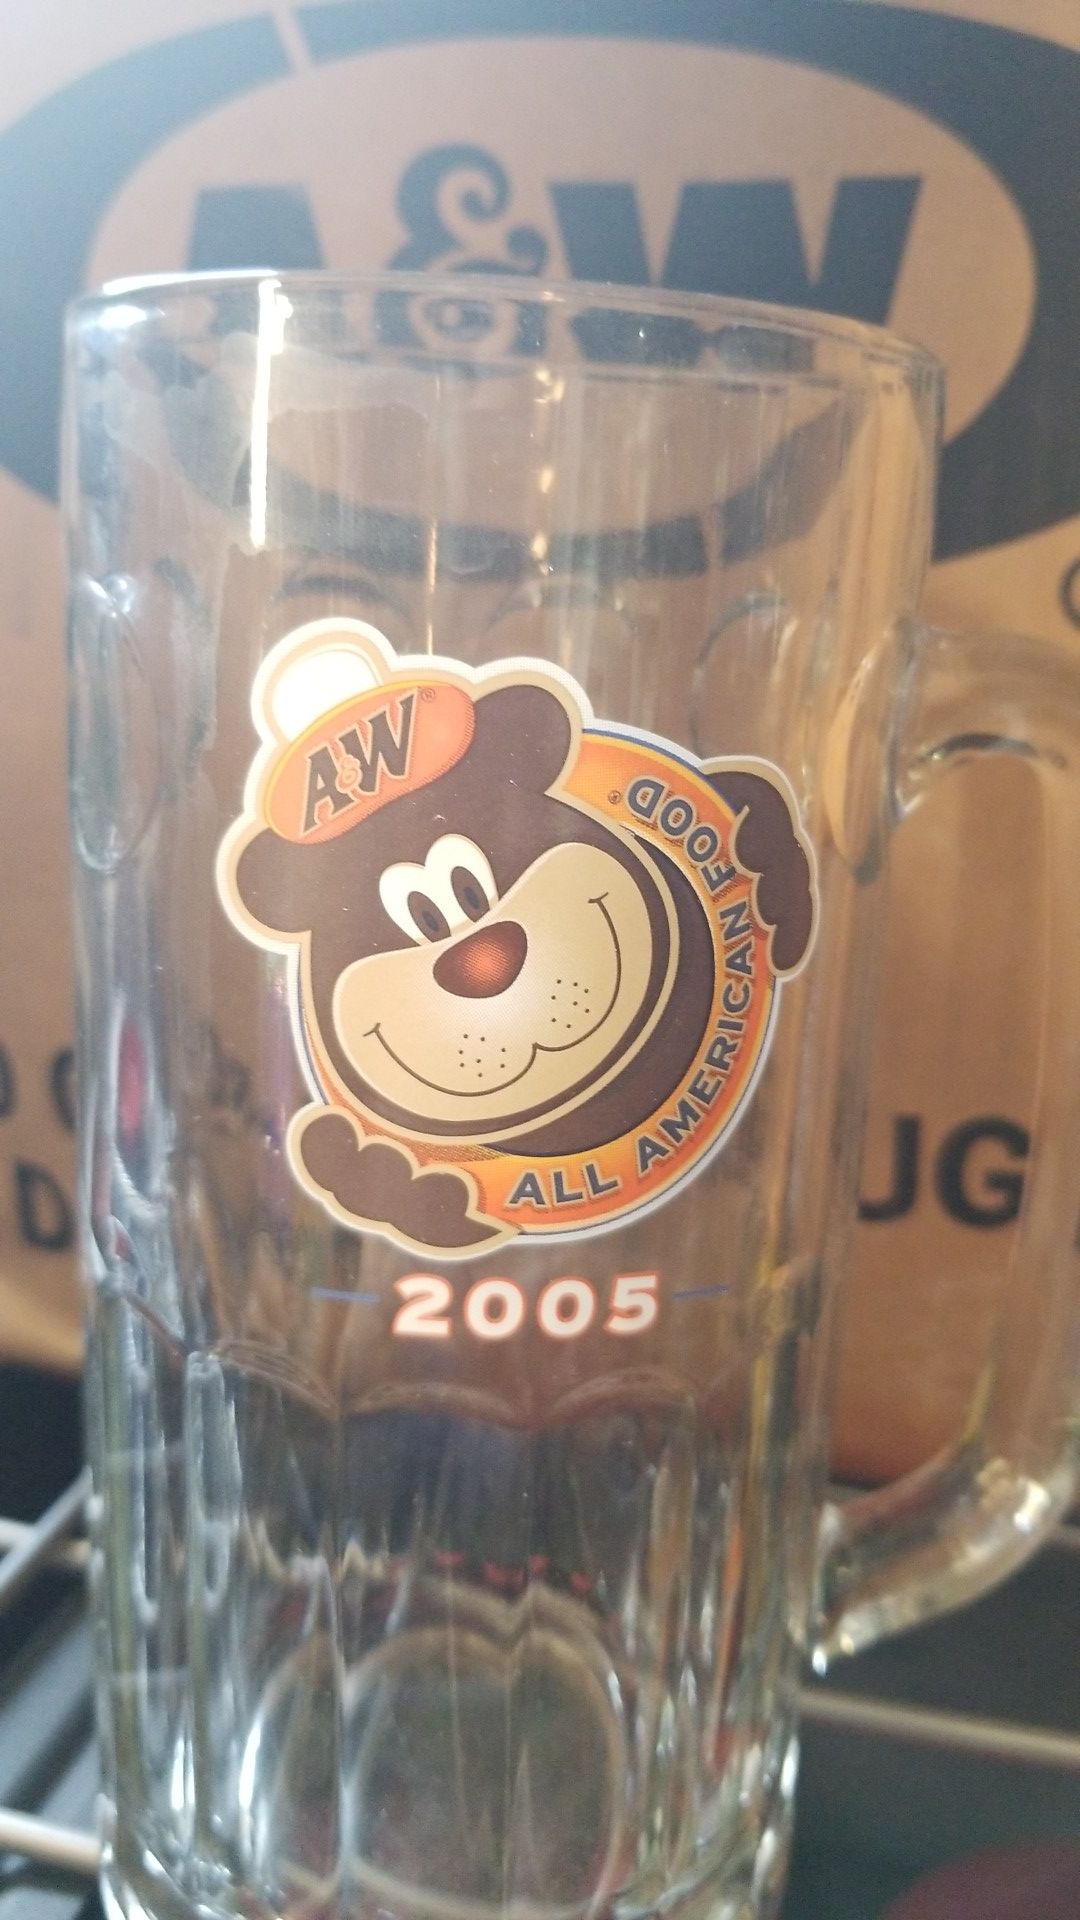 2005 20oz A&W Glass mug with Bear face on it. Collectable